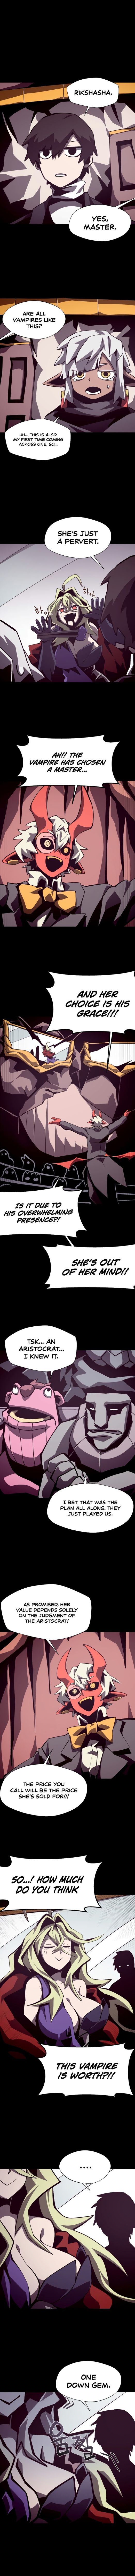 Dungeon Odyssey - Chapter 44 Page 2